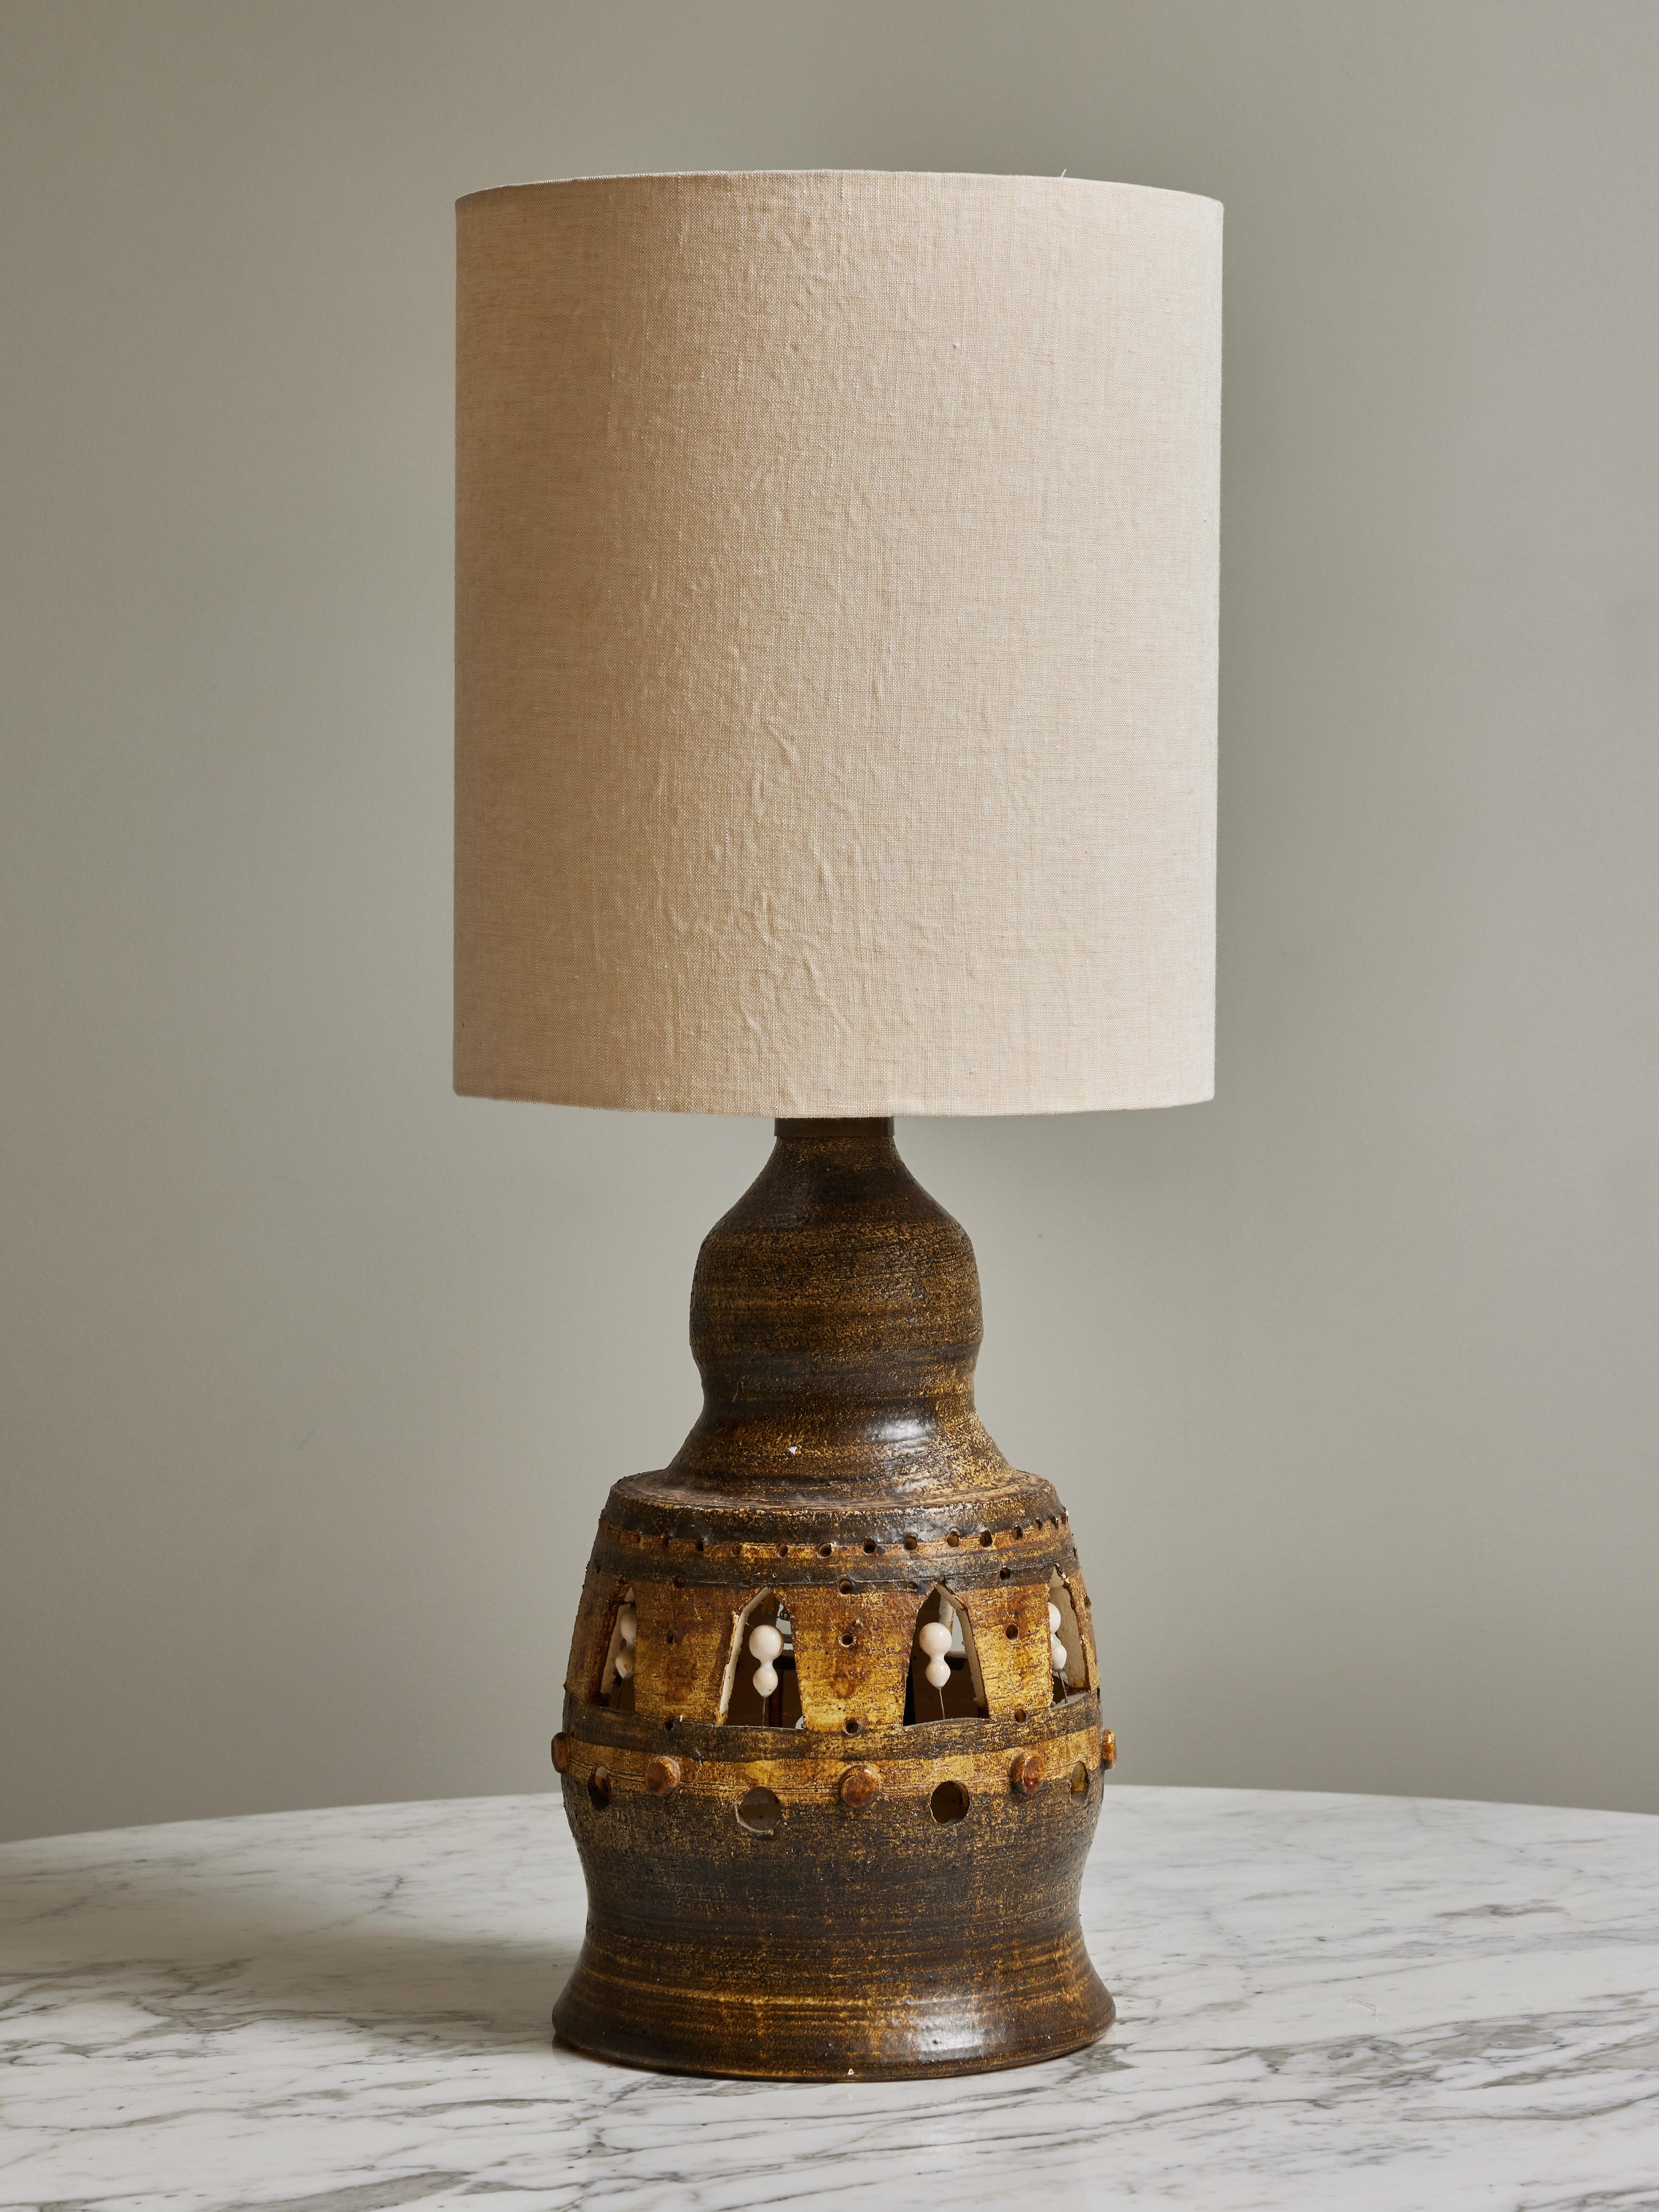 Ceramic table lamp with different glaze by the french artist George Pelletier.
Inner lighting as well as a regular bulb, hidden by a newly made shade.

Born in 1938 in Brussels, Belgium, Georges Pelletier is a ceramist who lives and works in Cannes,